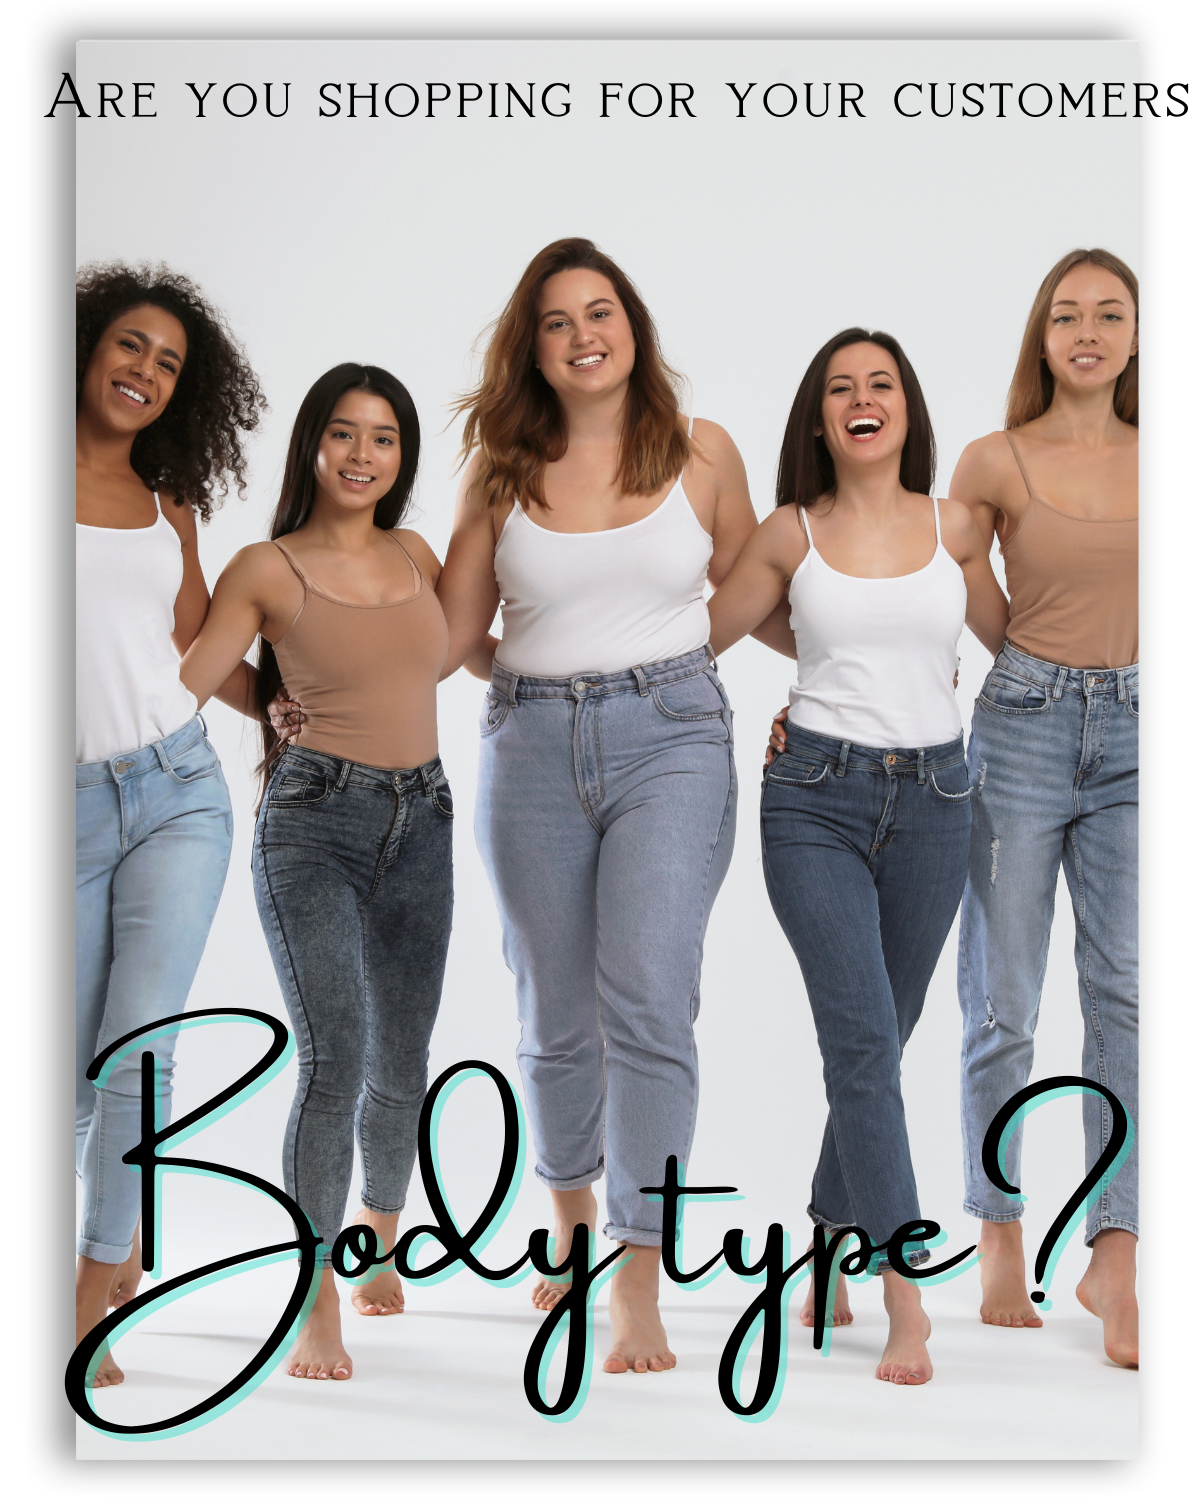 Are You Shopping For Your Customers Body Type?